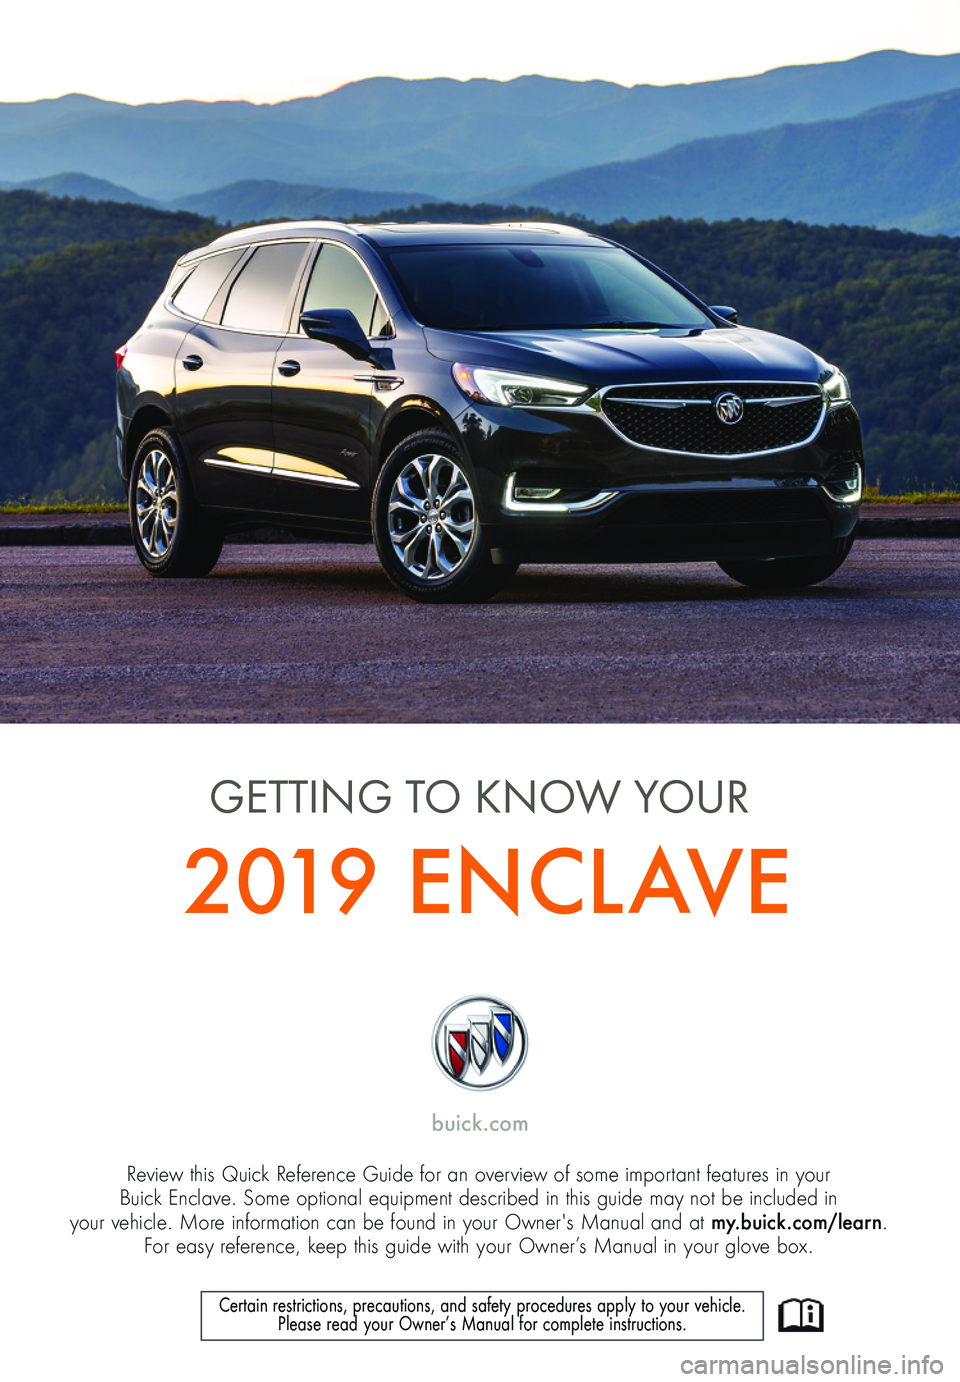 BUICK ENCLAVE 2019  Get To Know Guide 1
Review this Quick Reference Guide for an overview of some important features in your  Buick Enclave. Some optional equipment described in this guide may not be included in  your vehicle. More inform